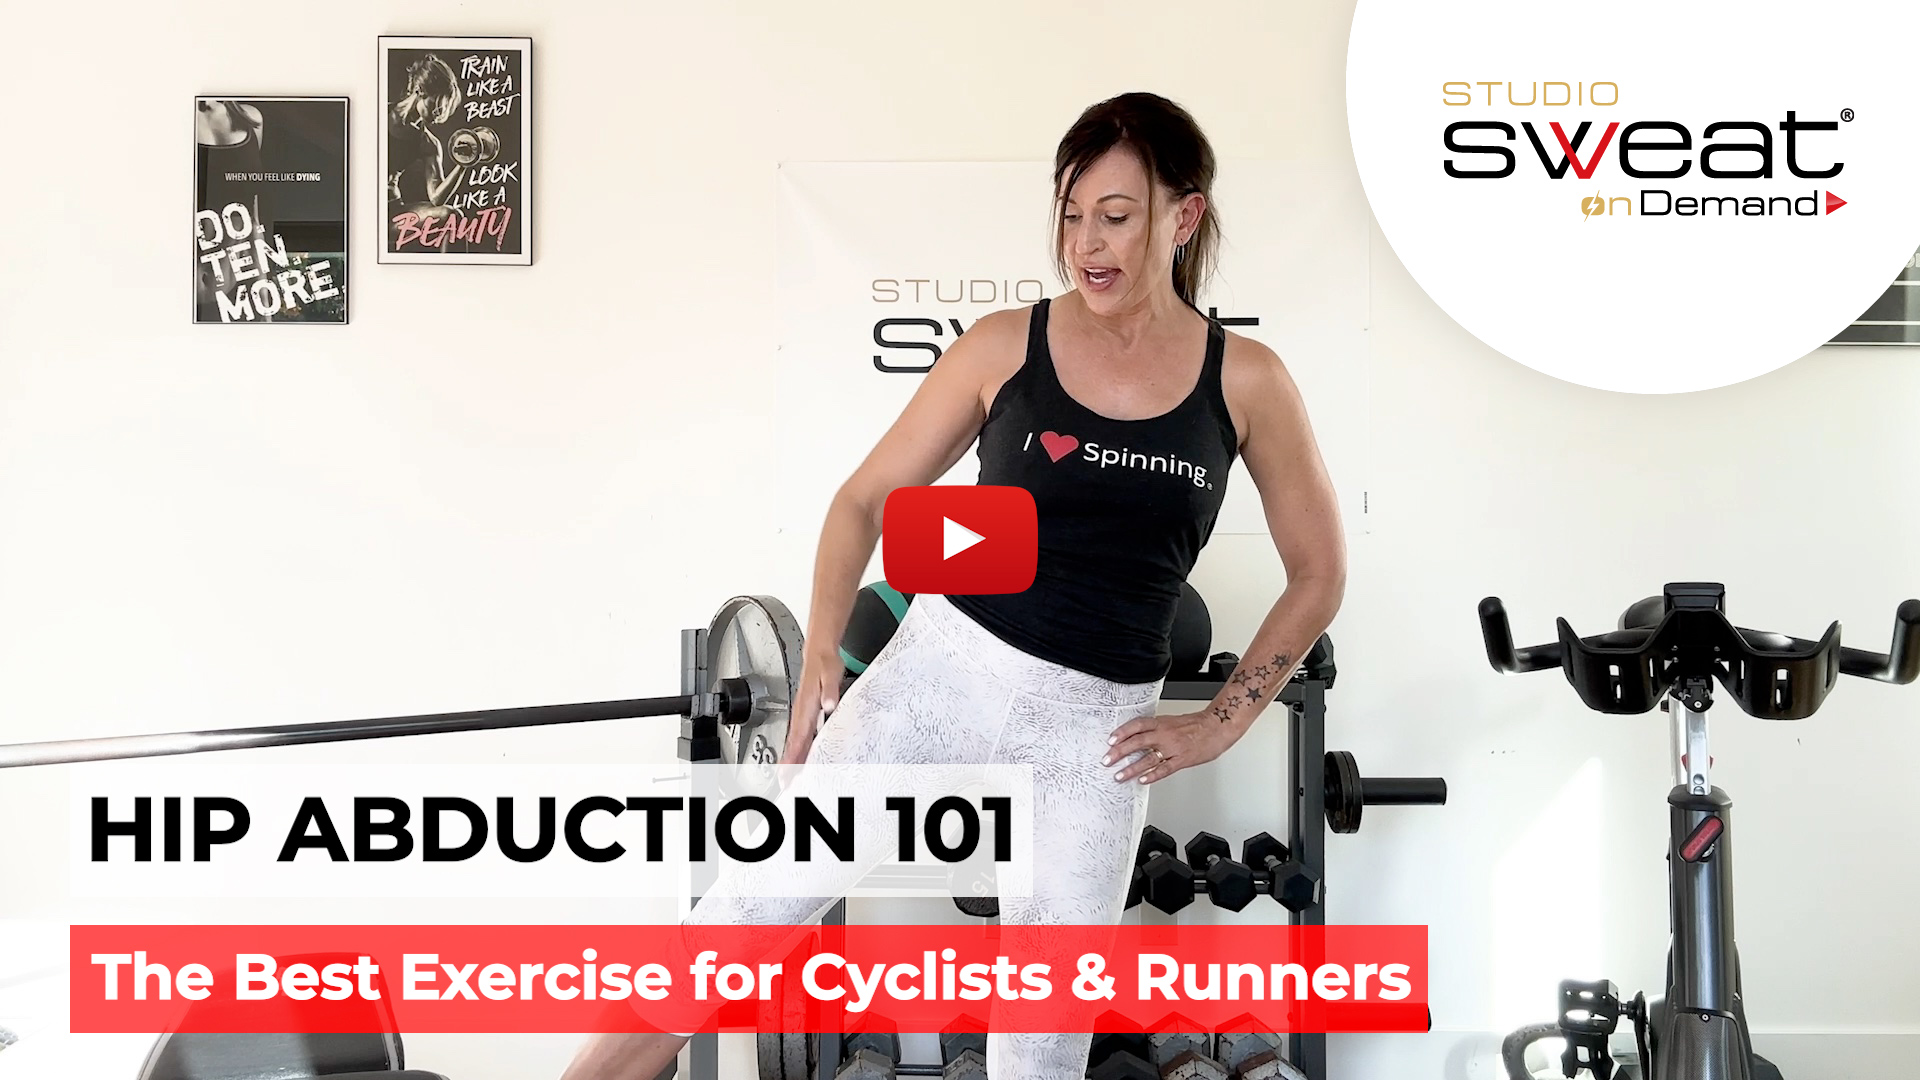 The Best Exercise to Improve Your Running or Cycling trainer tip video